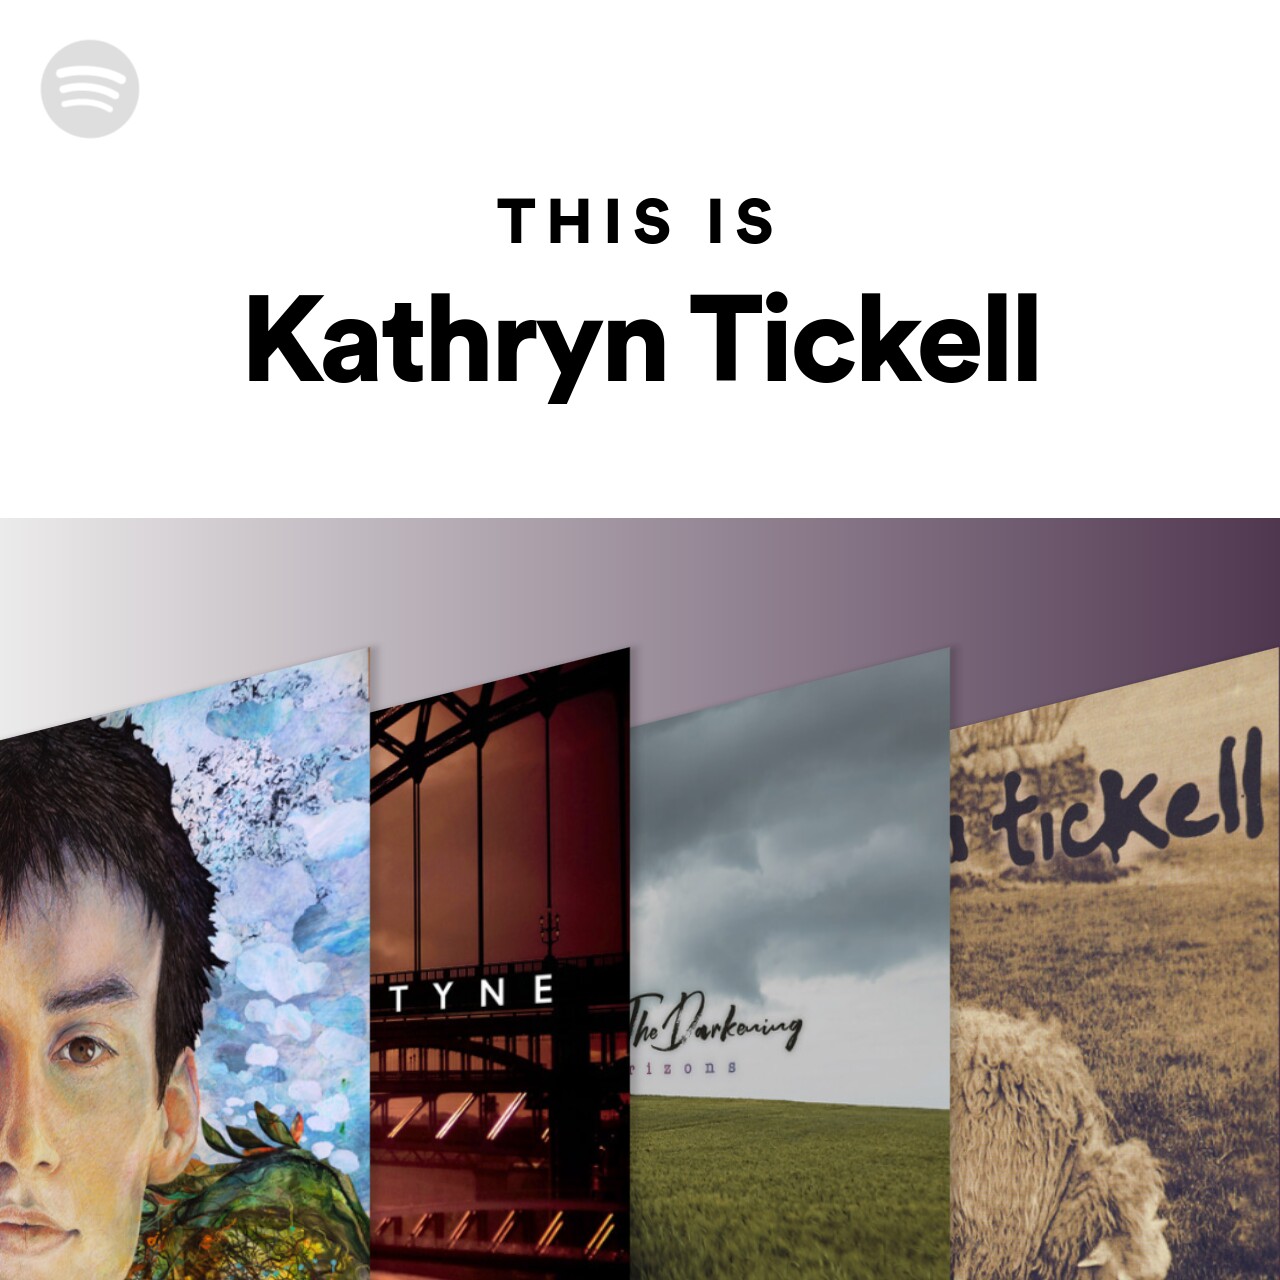 This Is Kathryn Tickell